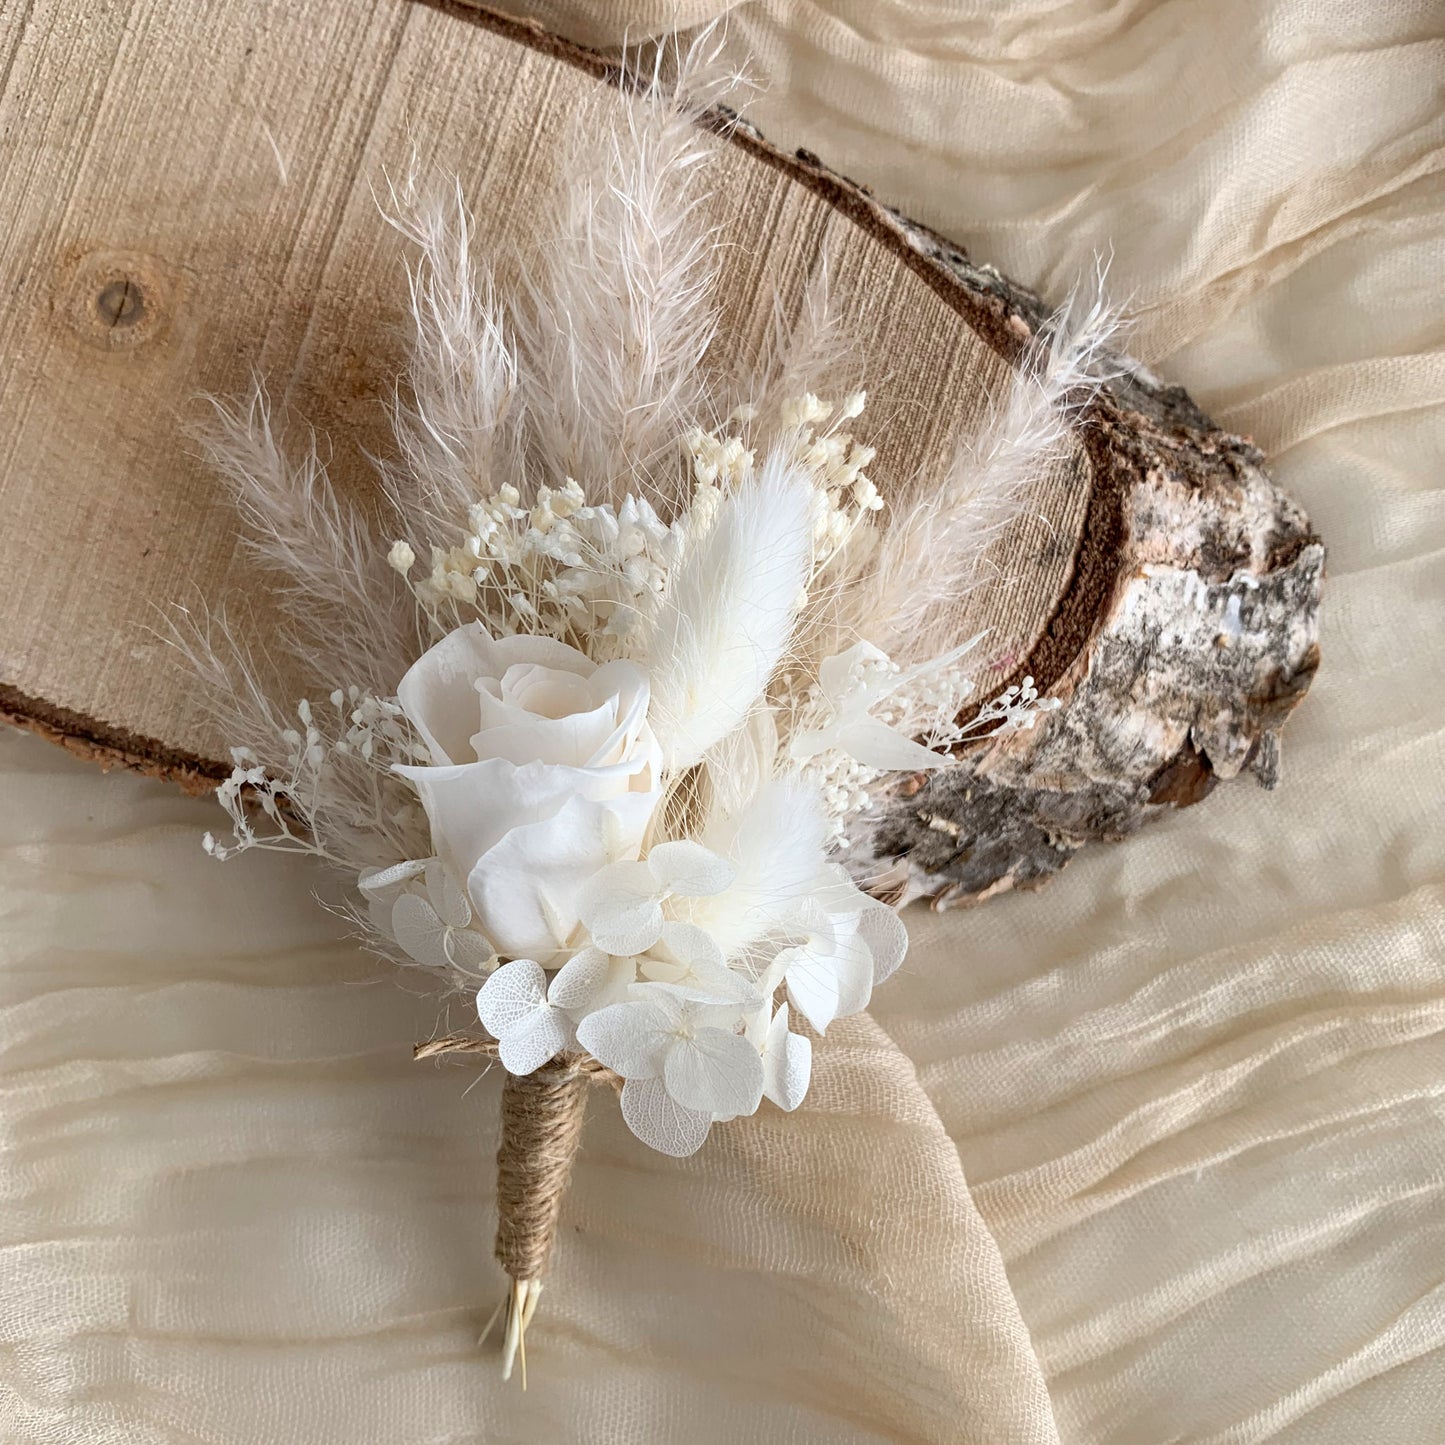 White Pampas dried flower buttonhole